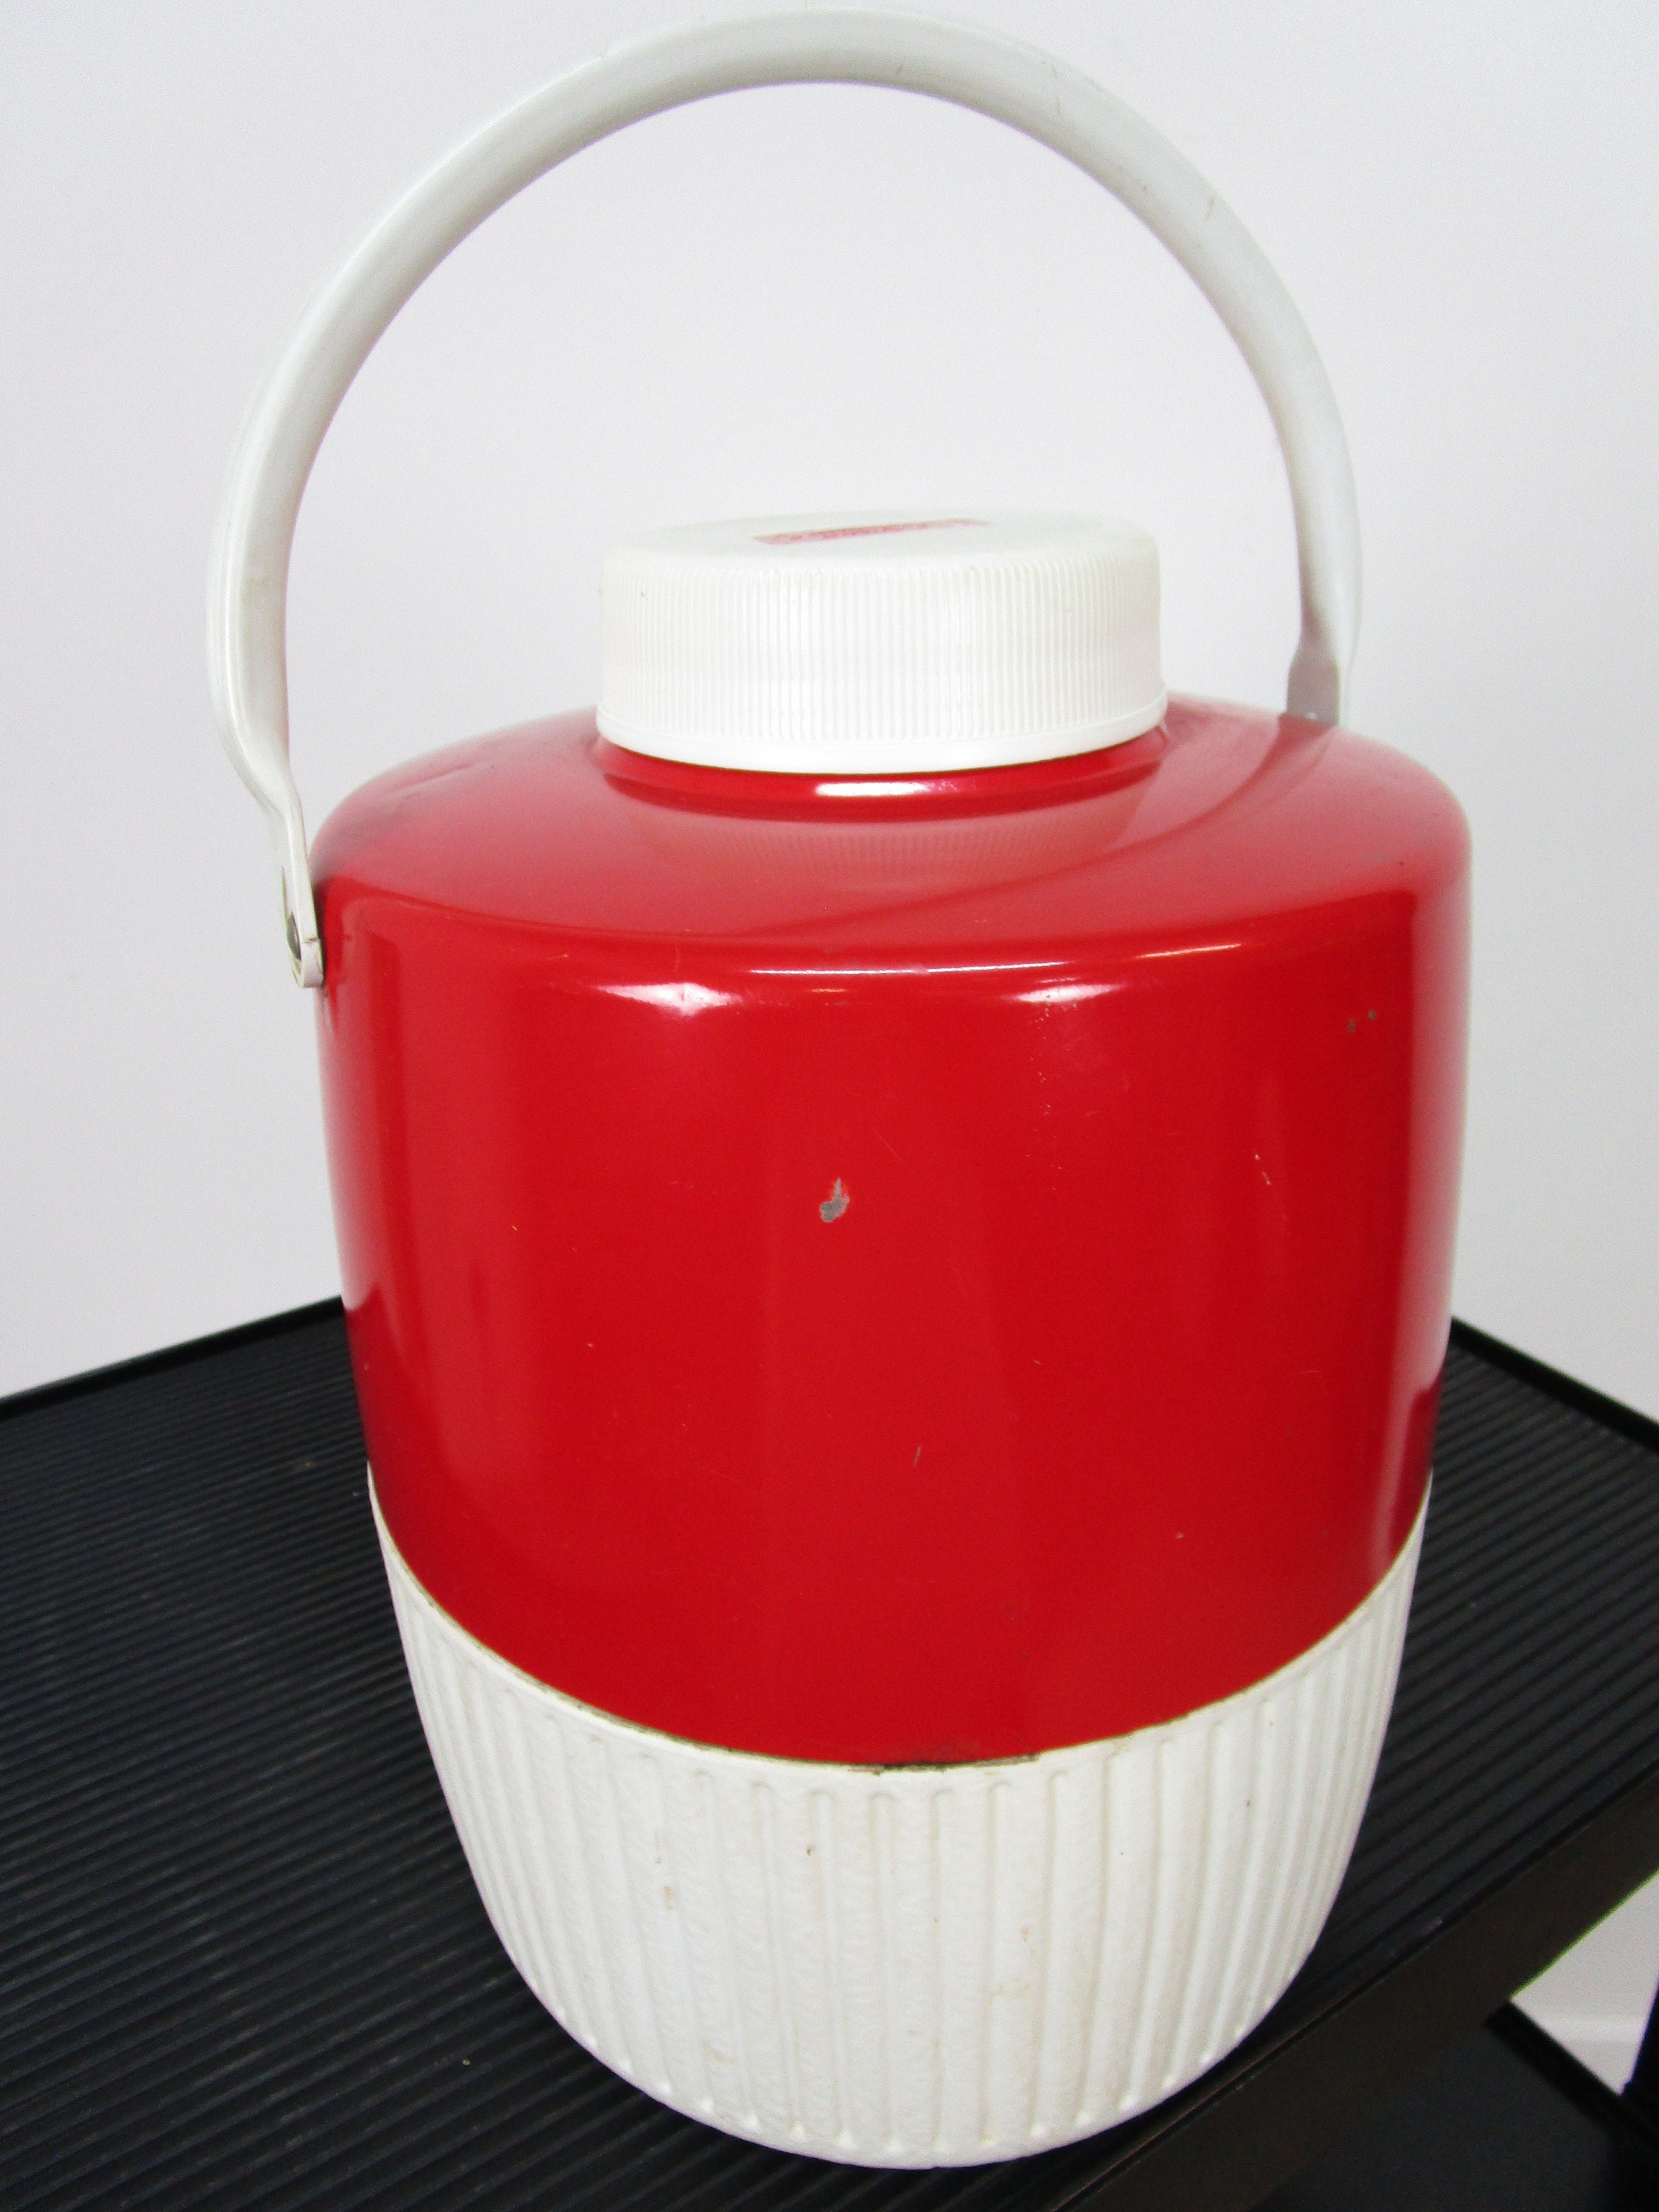 Coleman 1/2 Gallon Water Jug Cooler Bottle Red 6009 Model Made In